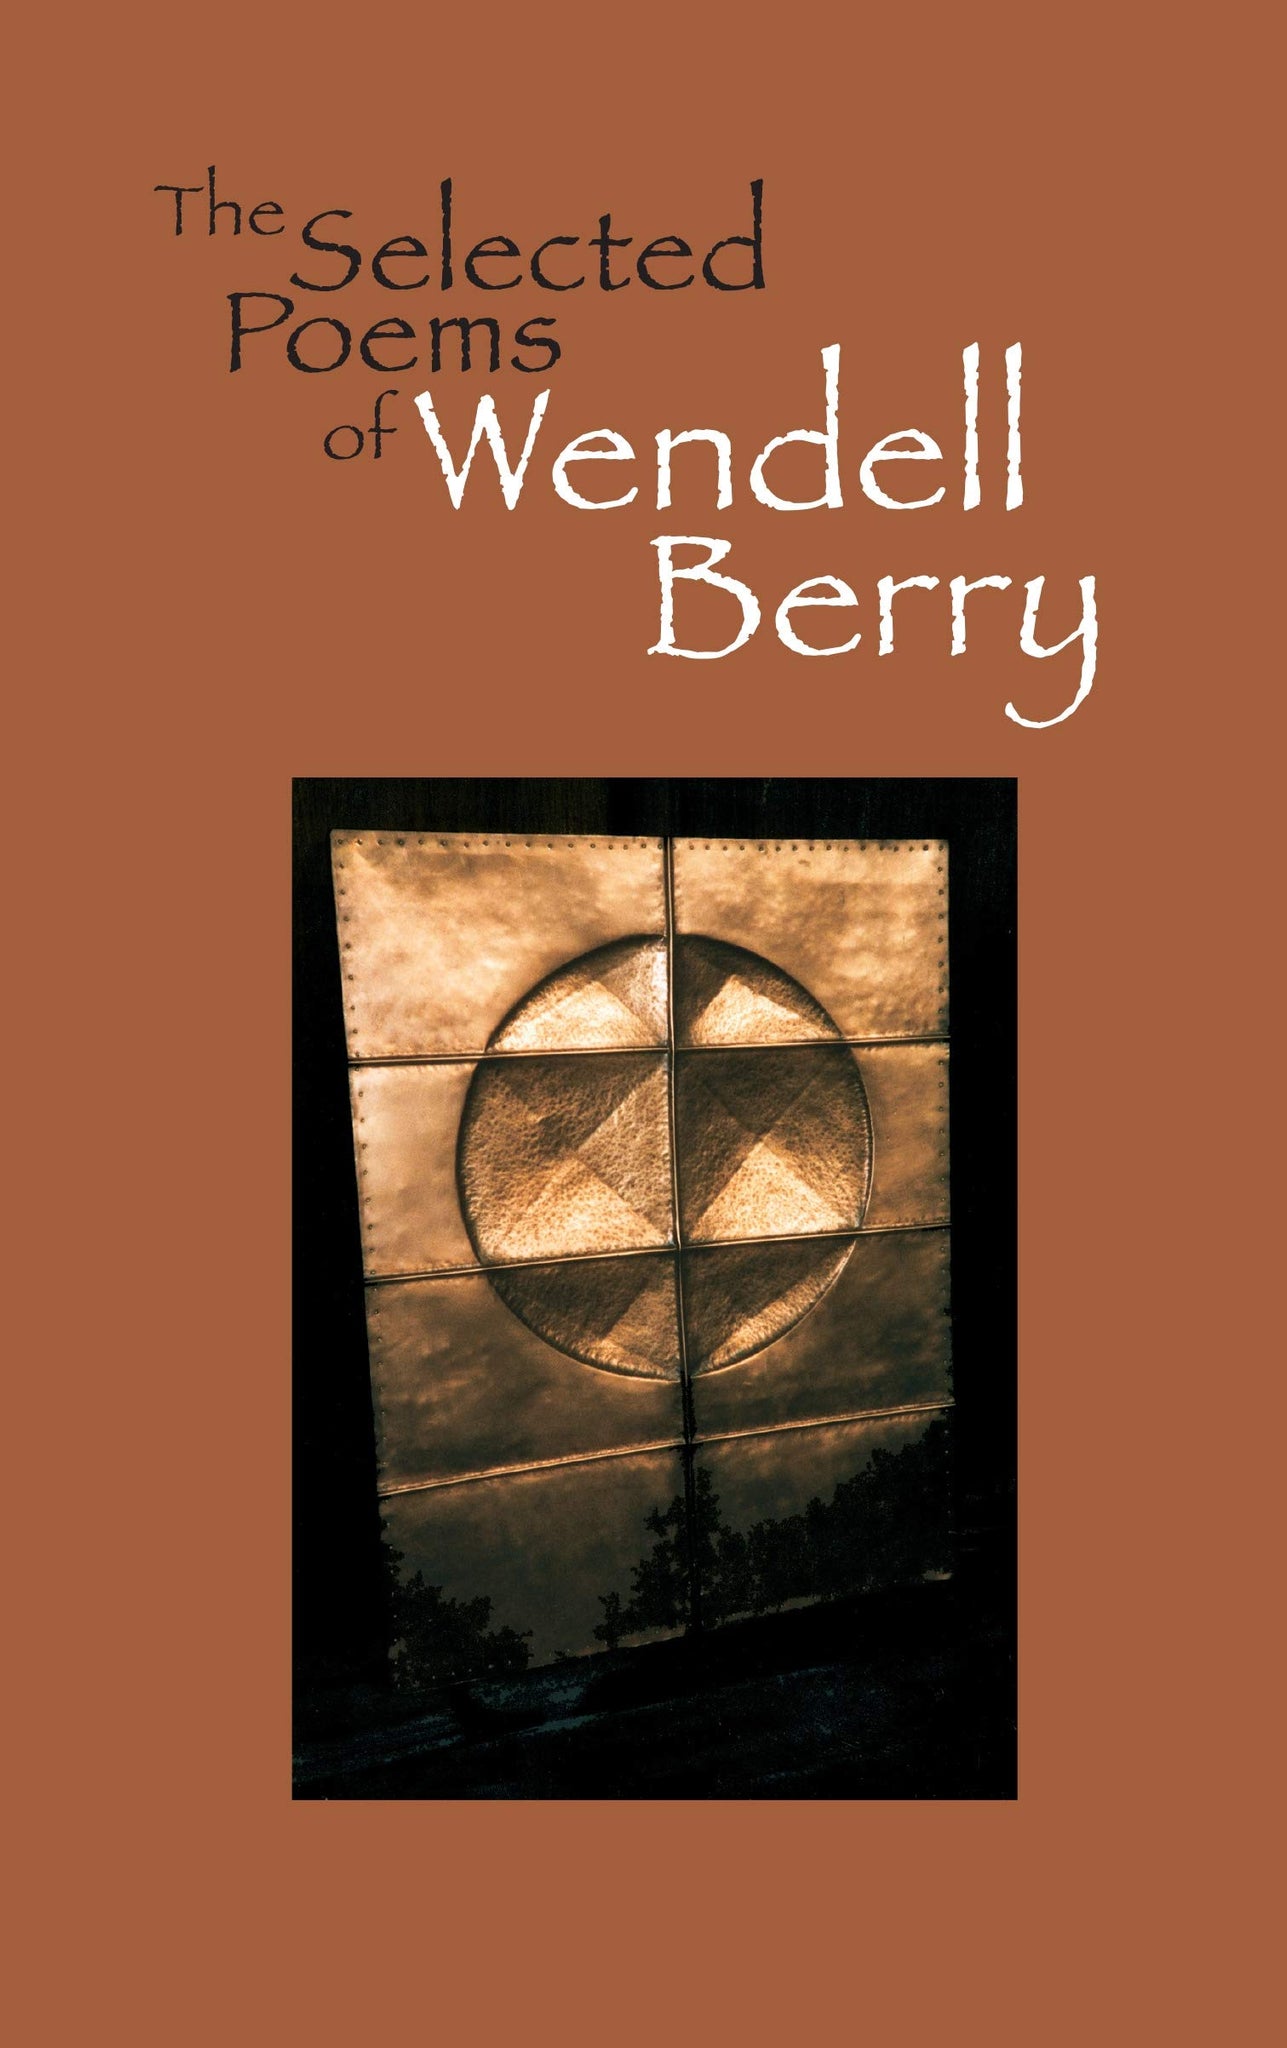 The Selected Poems of Wendell Berry (Hardcover)